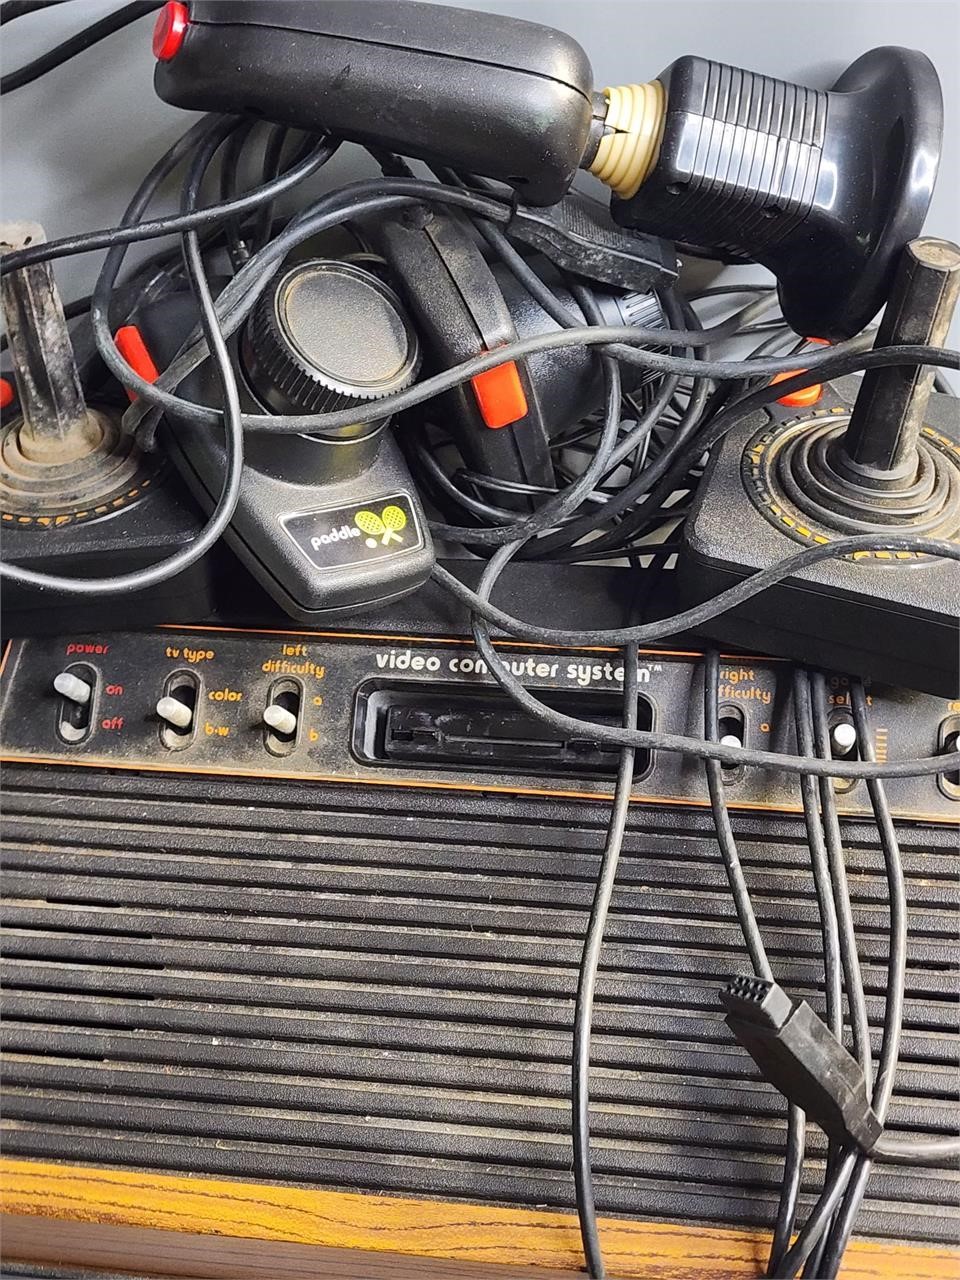 Atari 2600 Console with controllers, untested